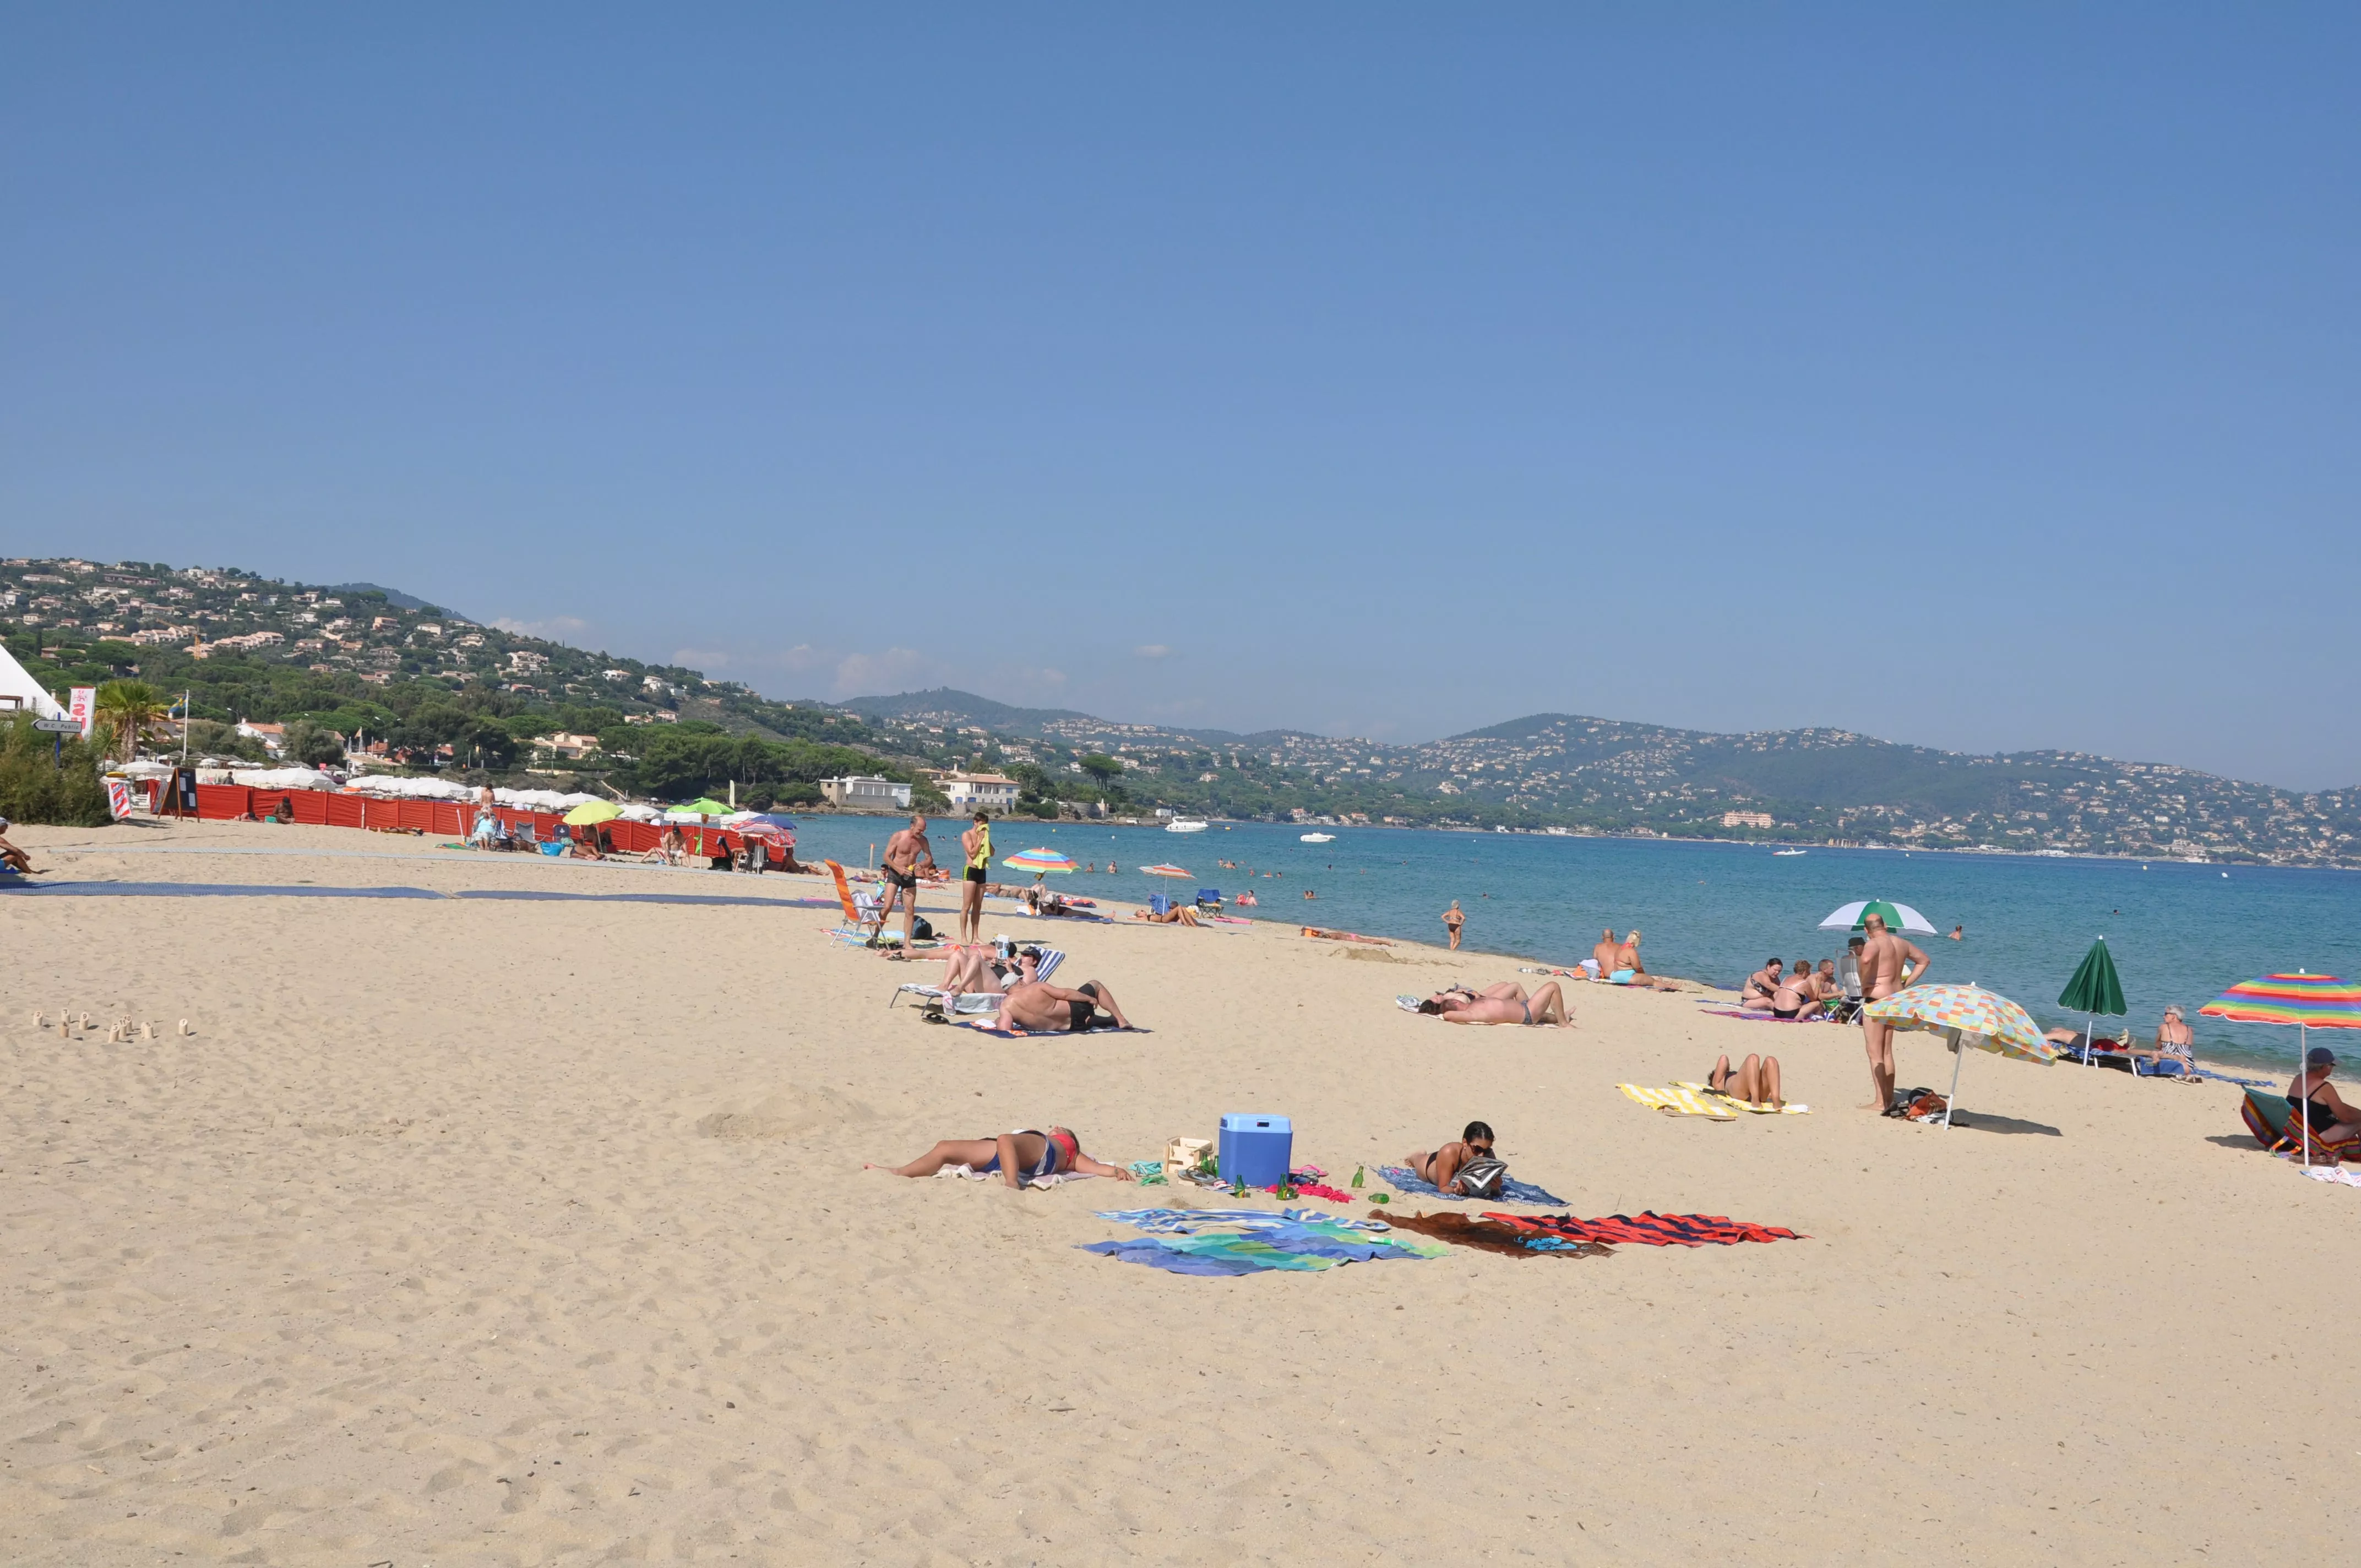 Plage de la Nartelle in France, Europe | Beaches - Rated 3.5